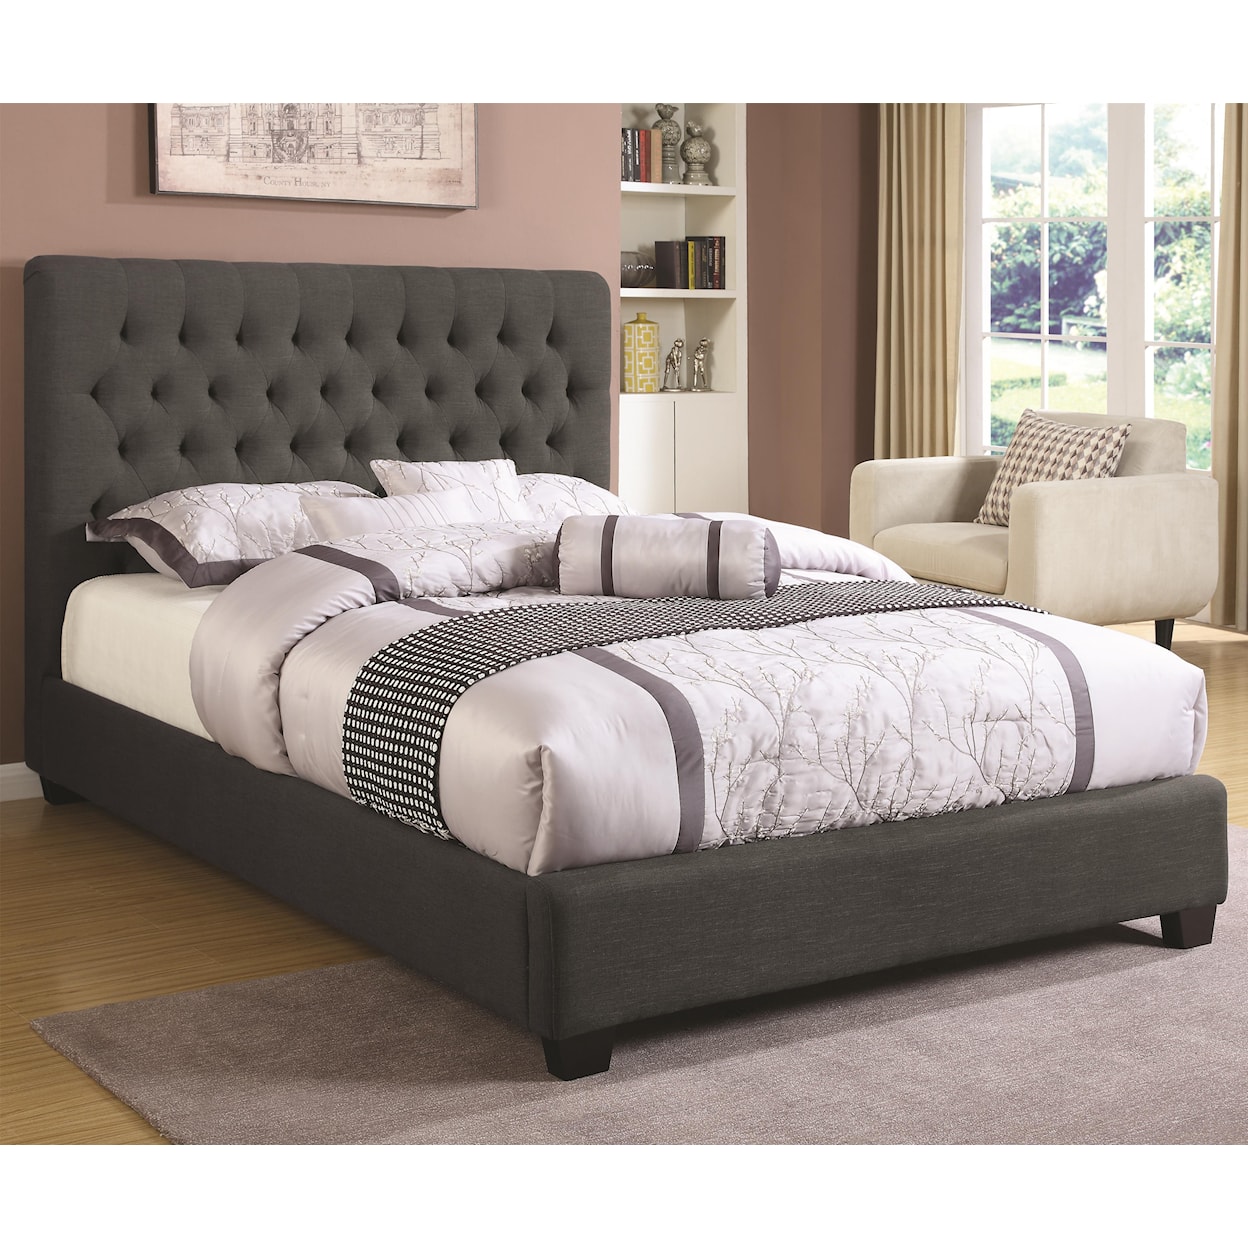 Coaster Upholstered Beds California King Chole Upholstered Bed